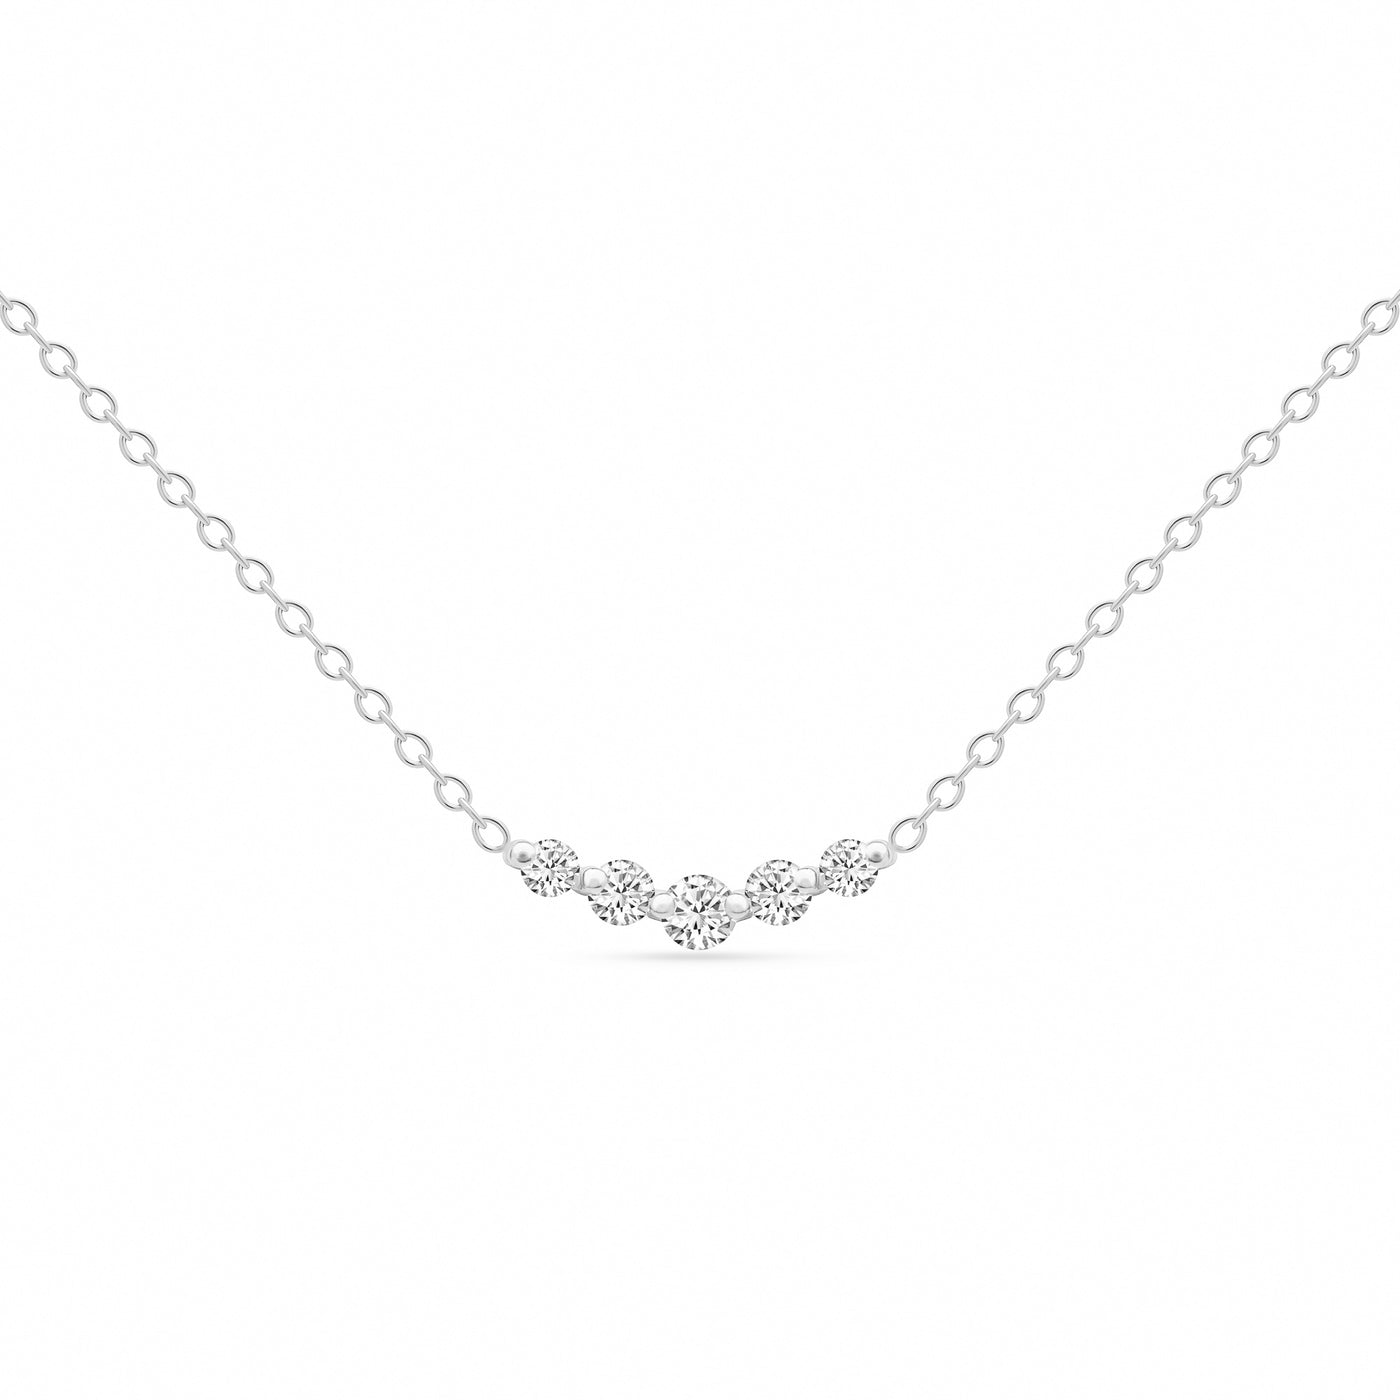 14K Solid White Gold Graduated 5 Stone Diamond Curved Bar Necklace